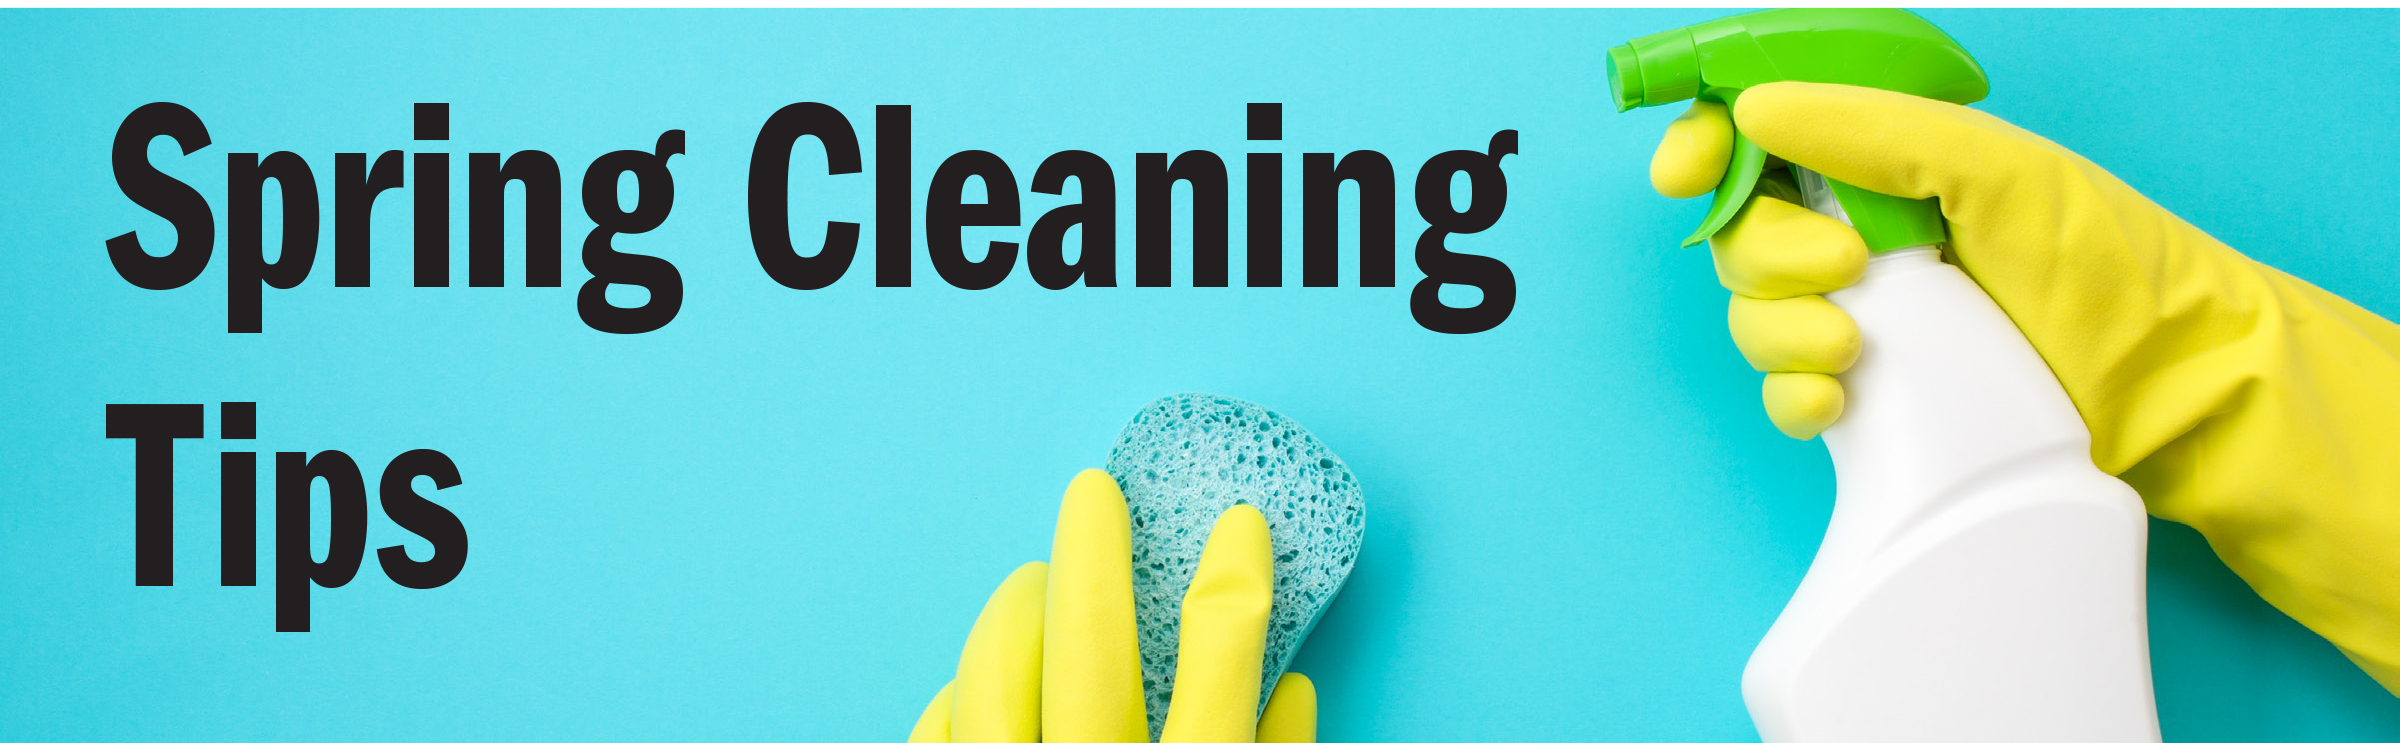 spring cleaning tips banner